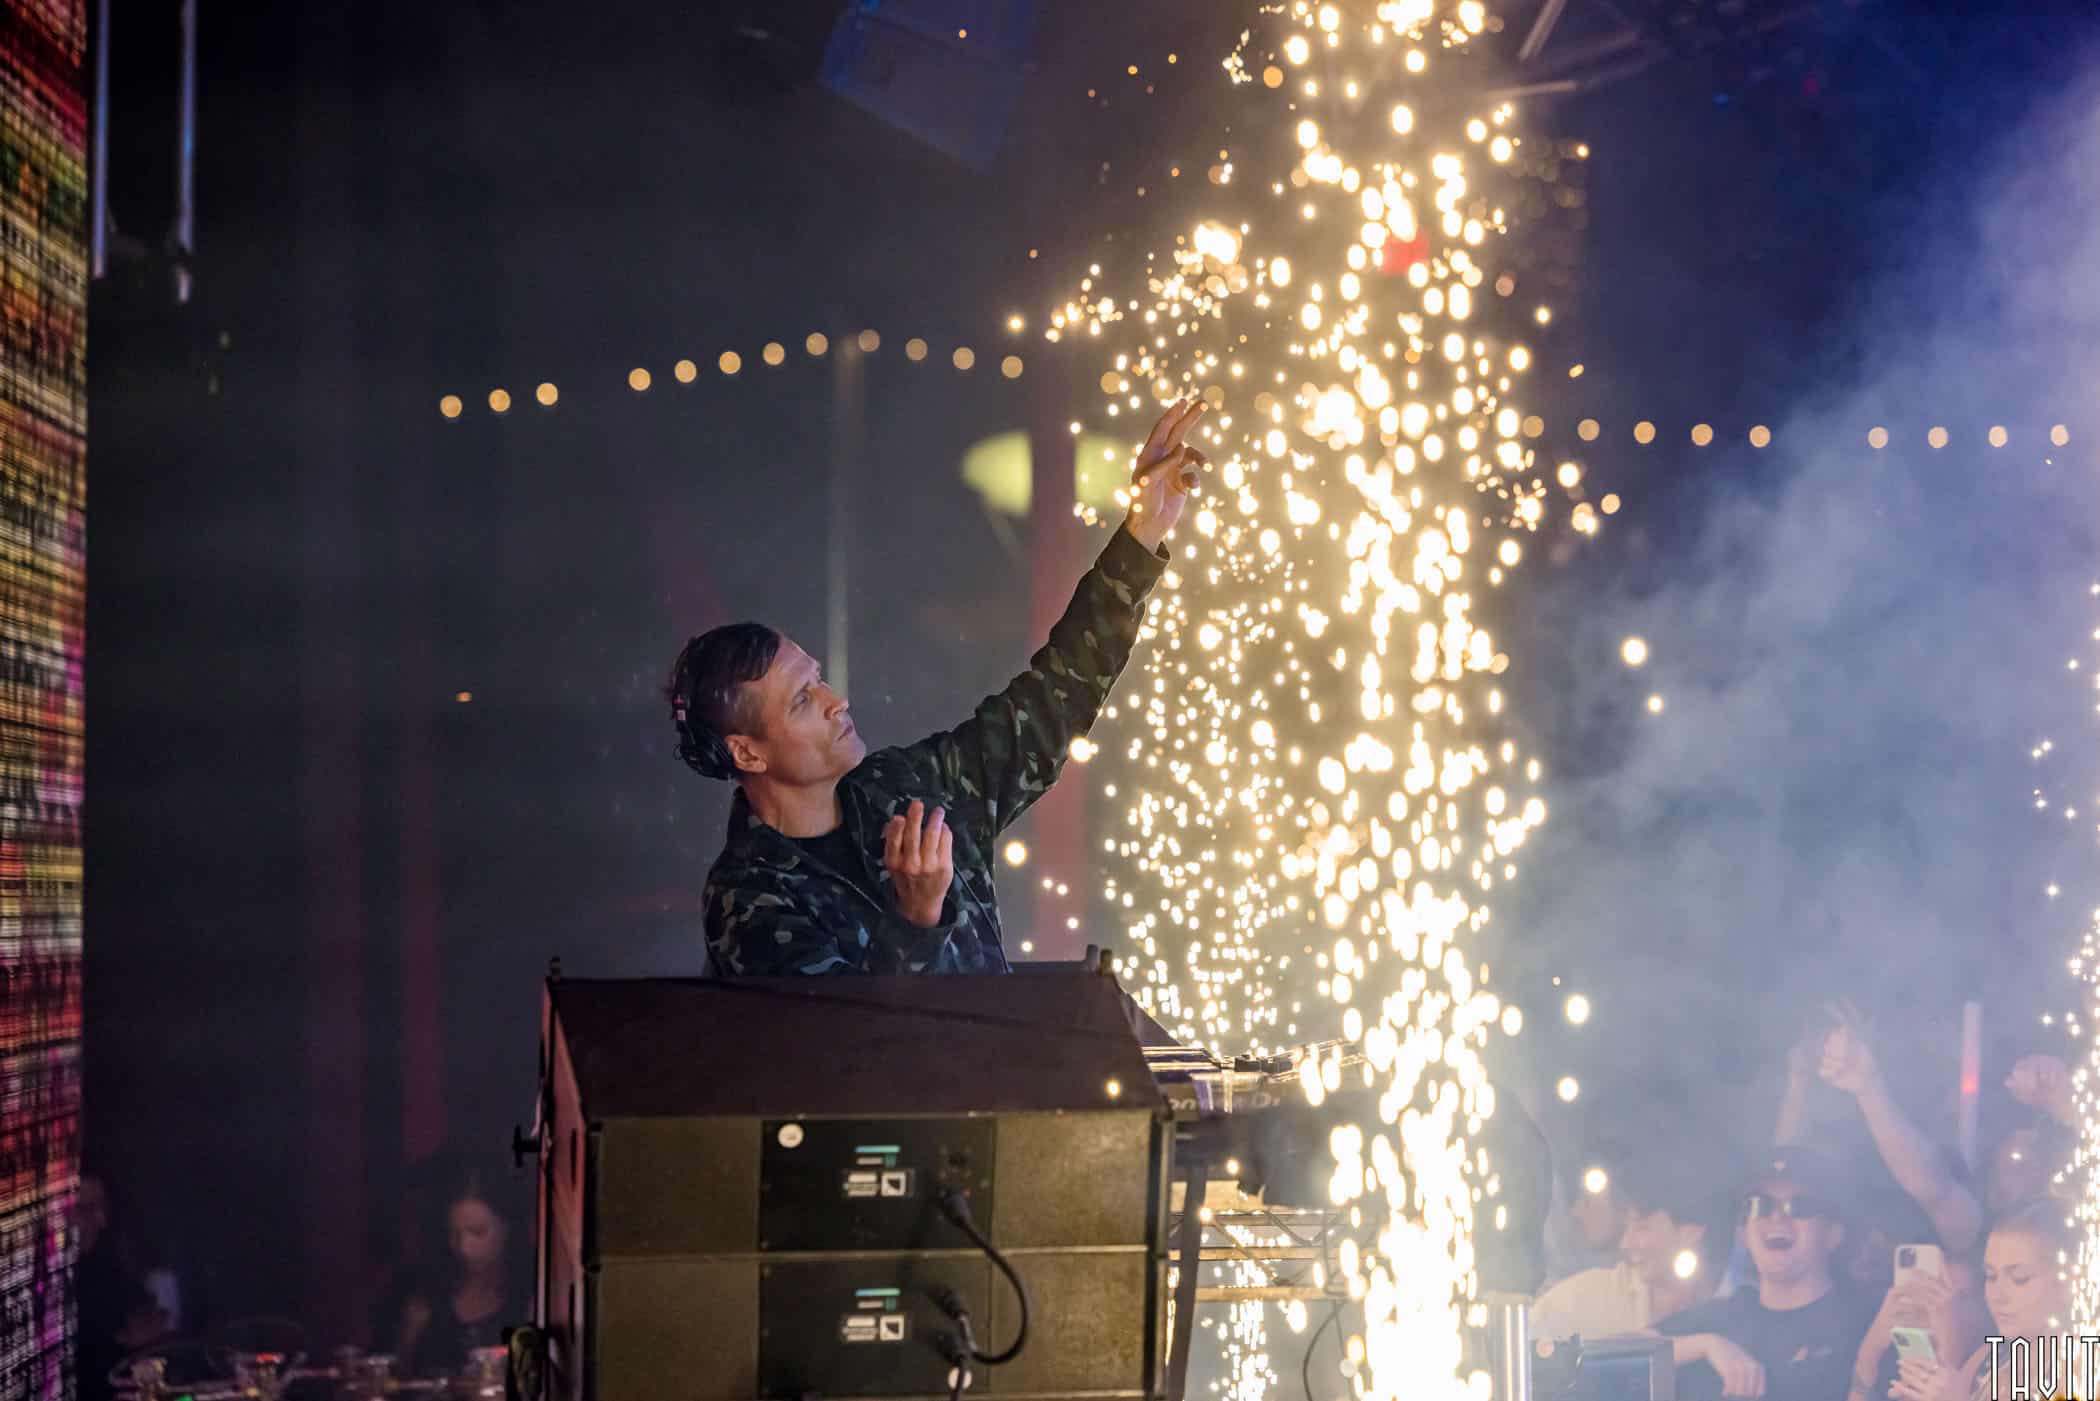 DJ on stage in behind spark fountain